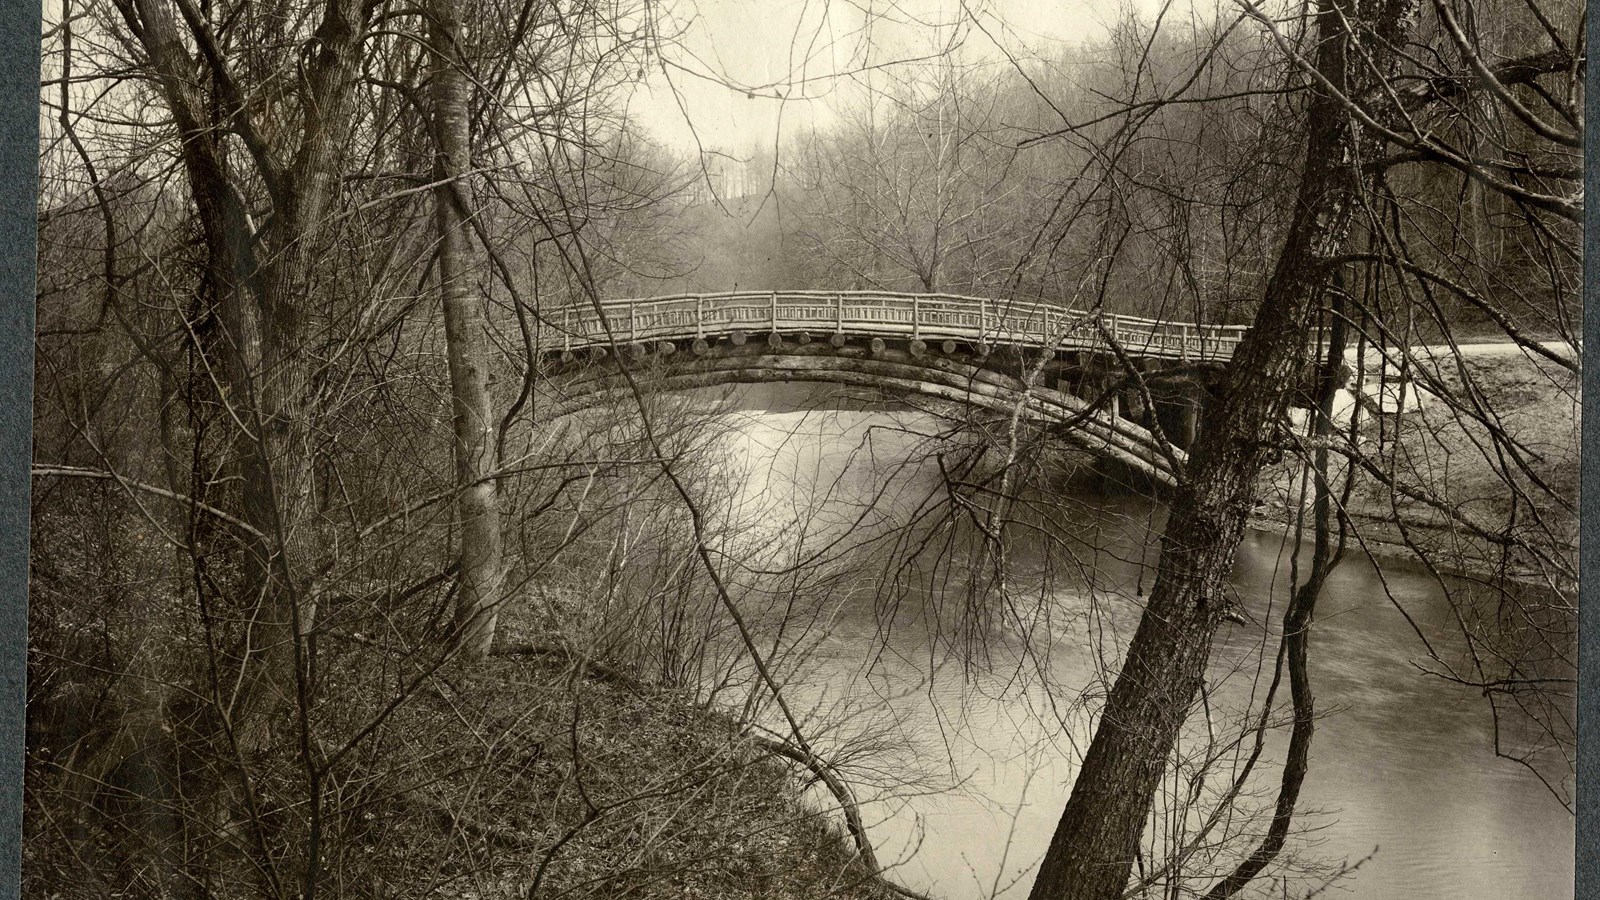 Black and white of bridge over water with trees on one side, hilly going down to water on other